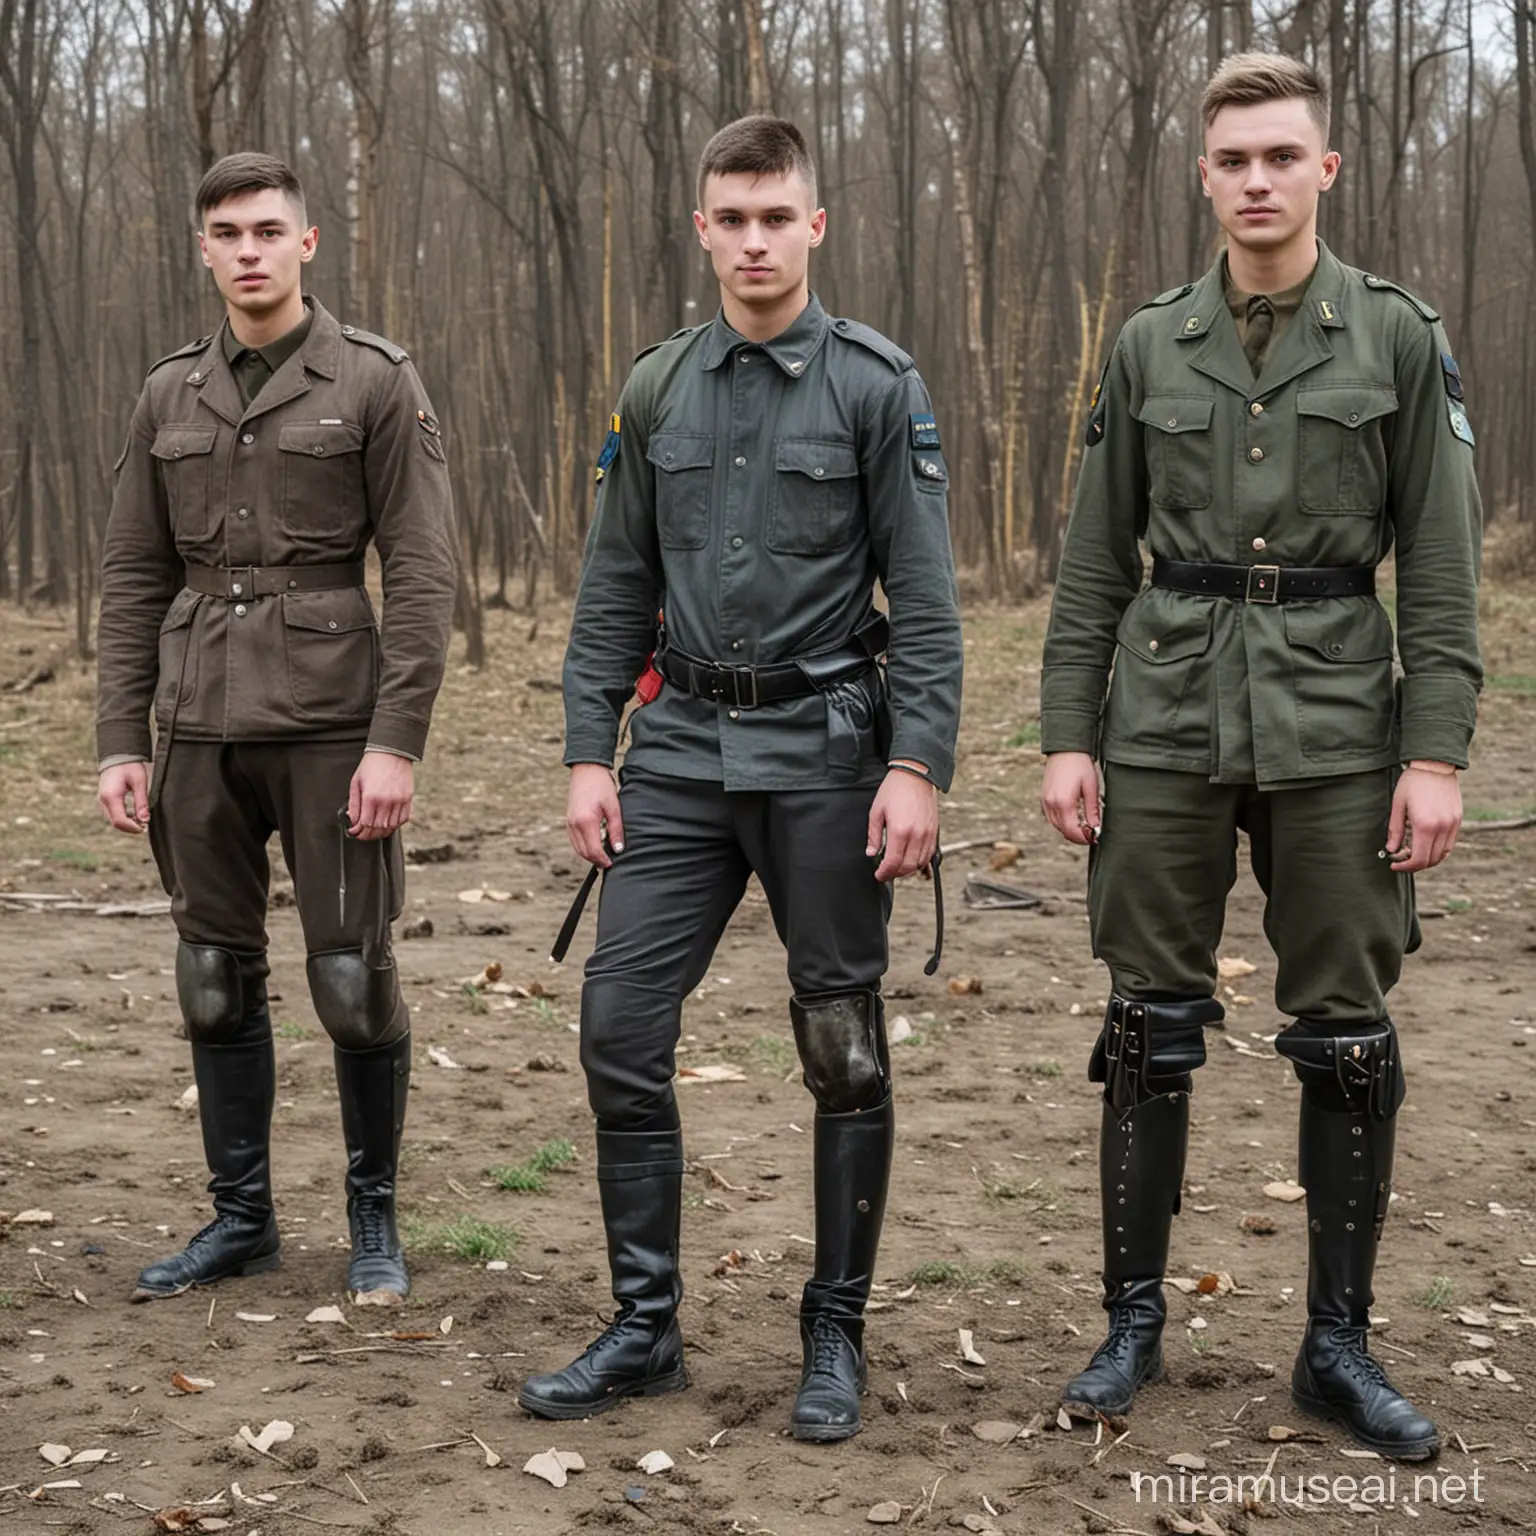 19, 20 and 21 year old Ukrainians train at an army camp at Lviv to fight the Russians. 21 year old has one of his legs replaces with a fake metal leg